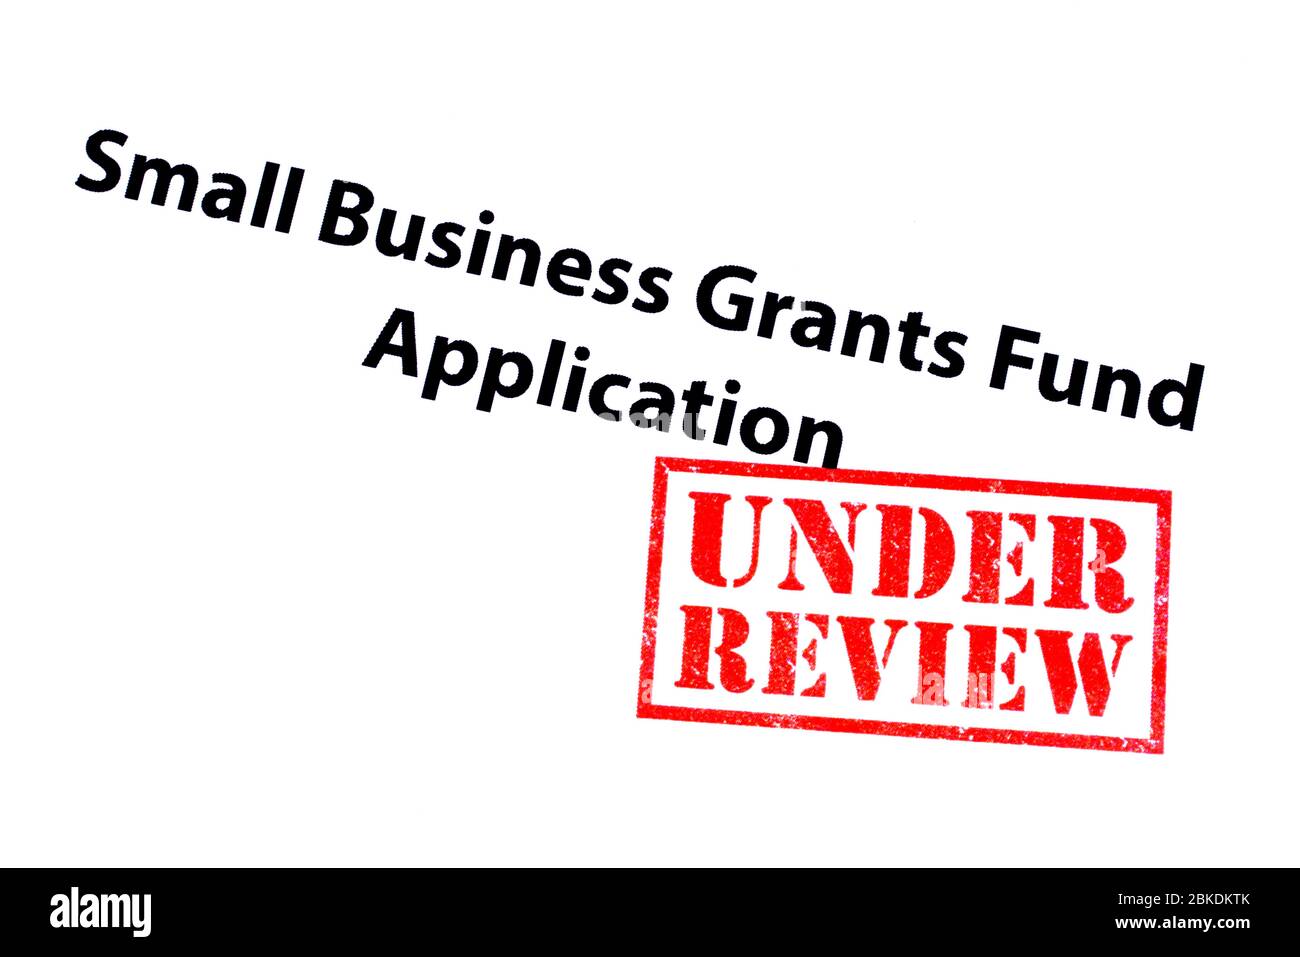 Small Business Grants Fund Application Heading With A Red Under Review Rubber Stamp Stock Photo Alamy